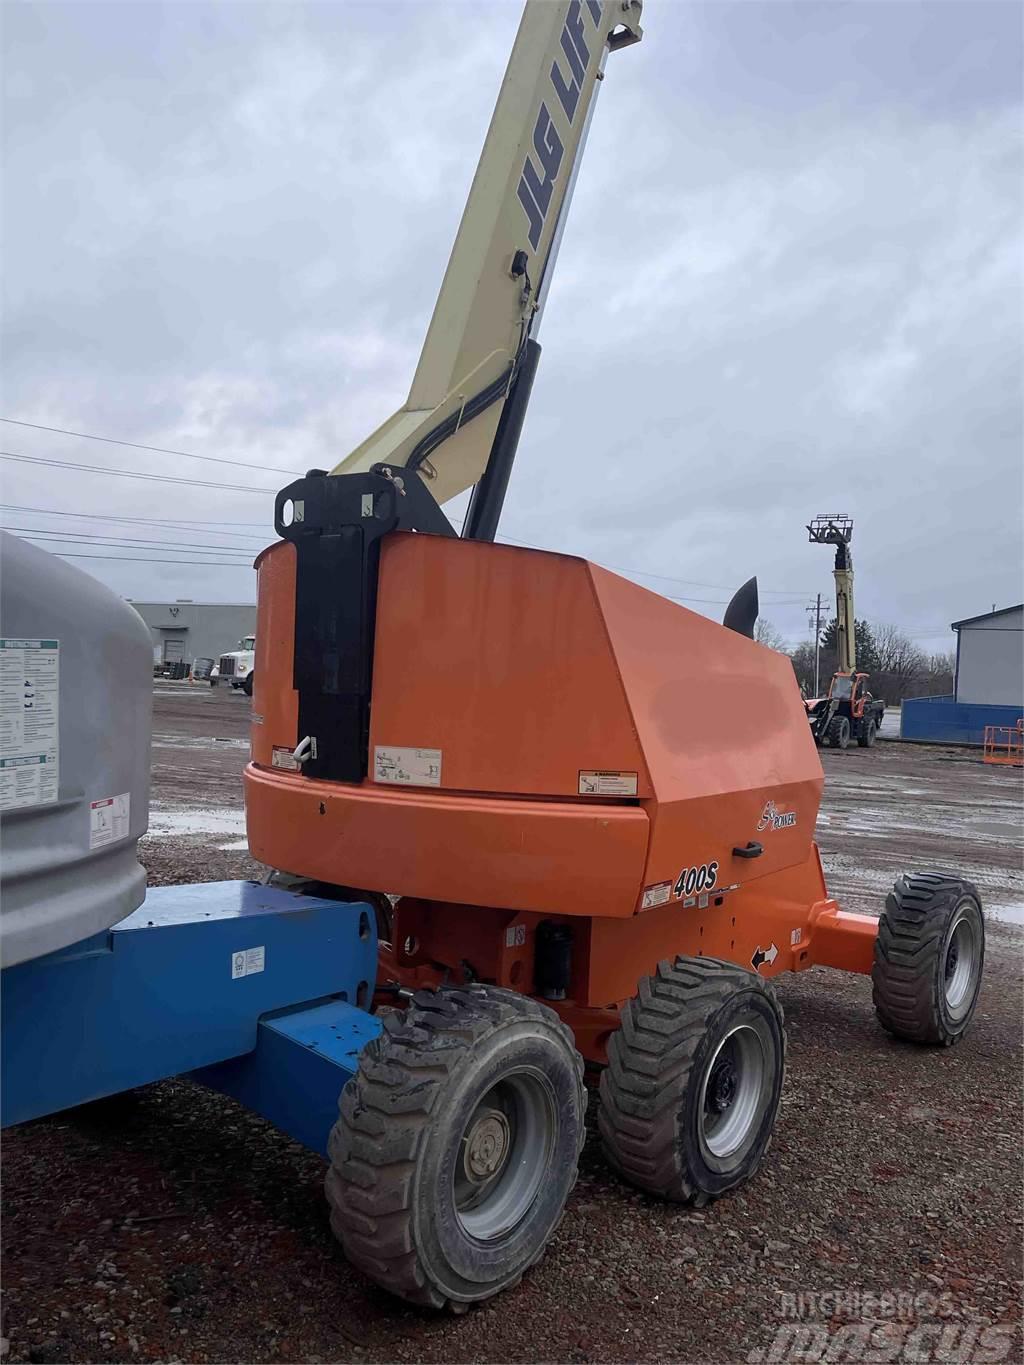 JLG 400S Compact self-propelled boom lifts